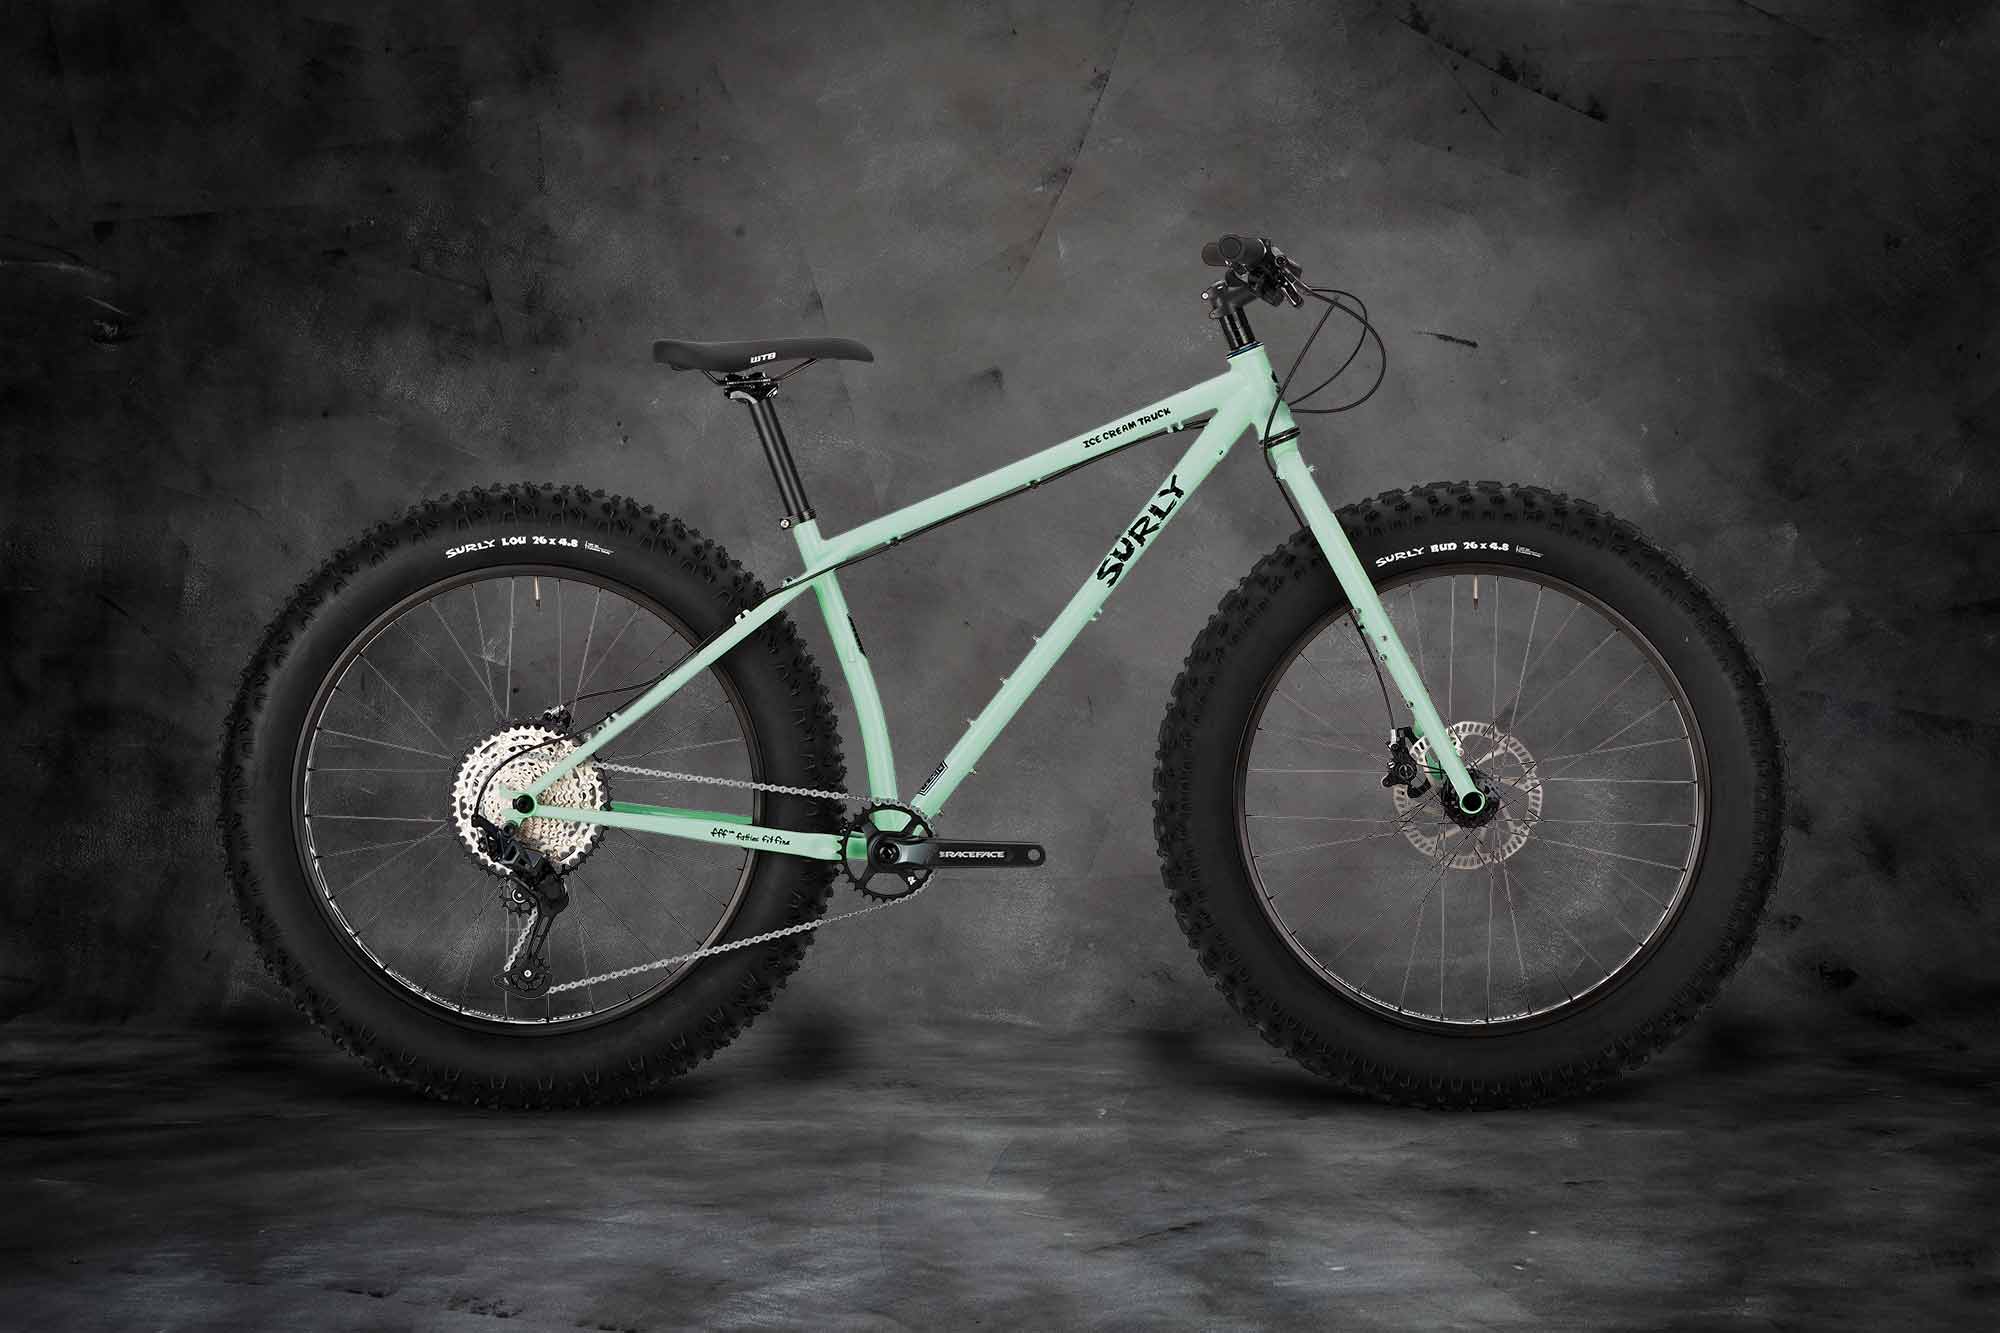 Surly Ice Cream Truck fat bike side view, Buttermint Green color